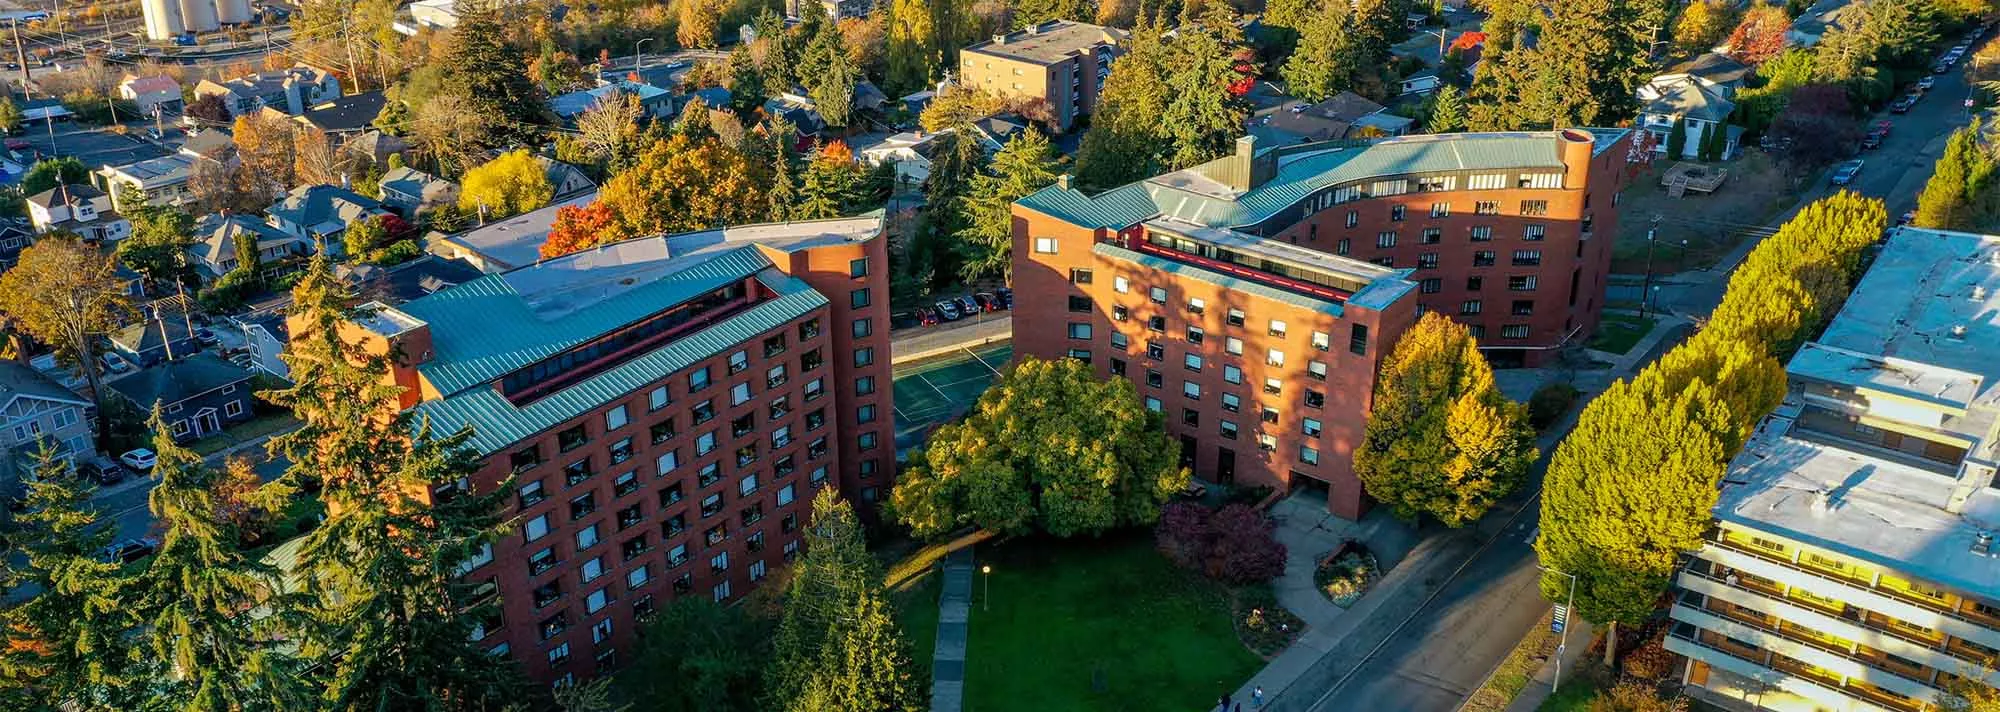 Aerial view of Mathes, Nash, and Higginson Halls, brick buildings at the north end of campus